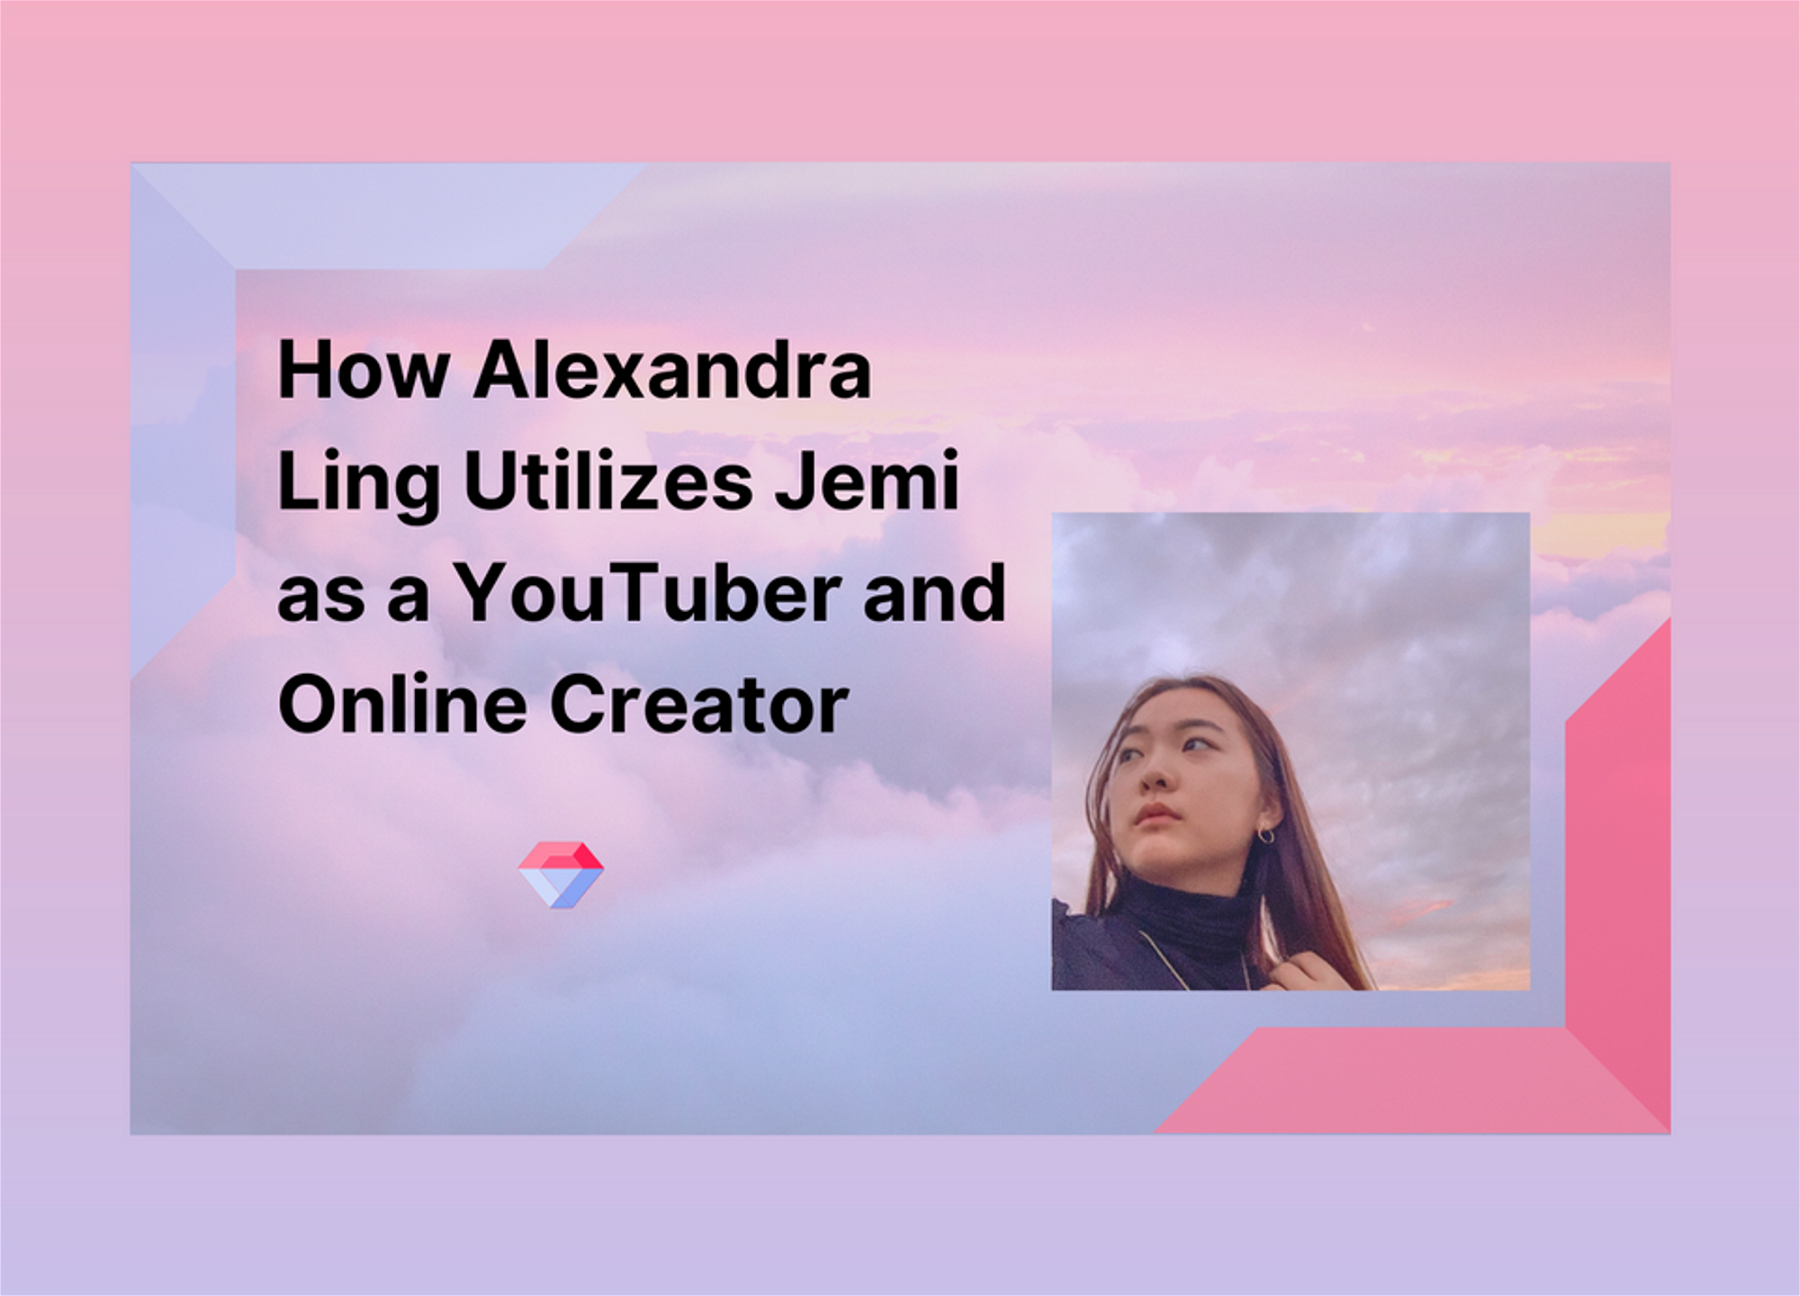 How Alexandra Ling (twirlingpages) Utilizes Jemi as a YouTuber and Online Creator